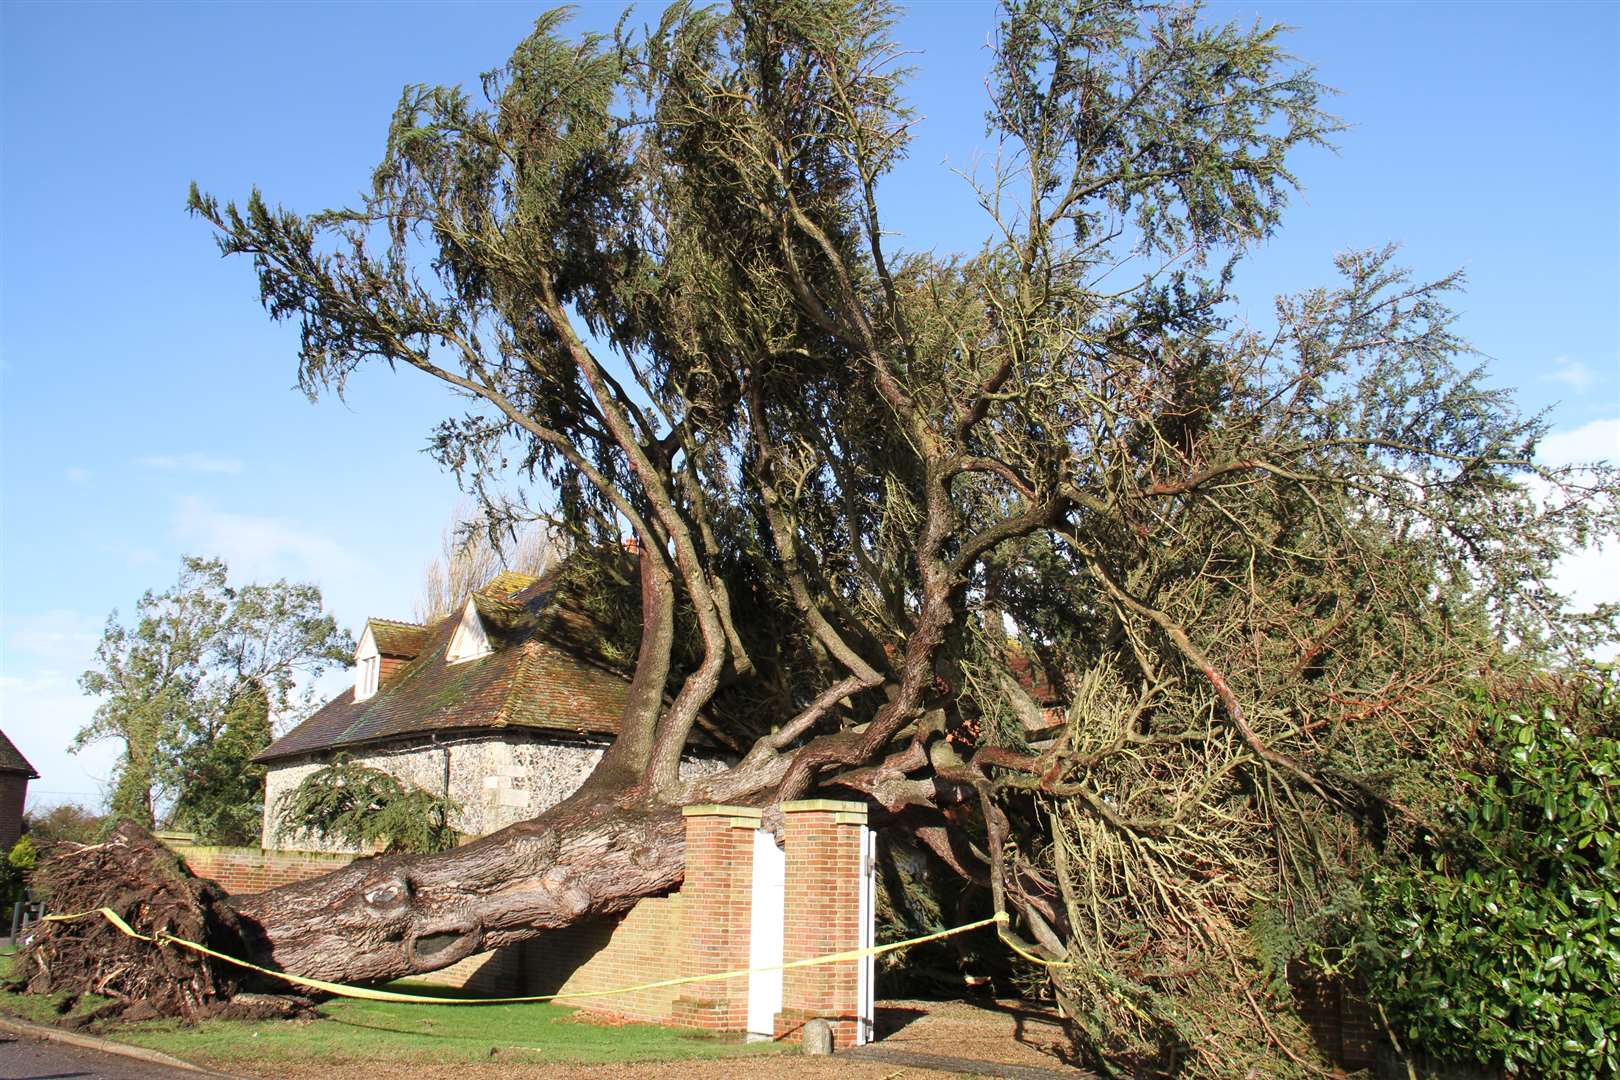 The soft ground has caused a giant cedar tree to fall in Ickham